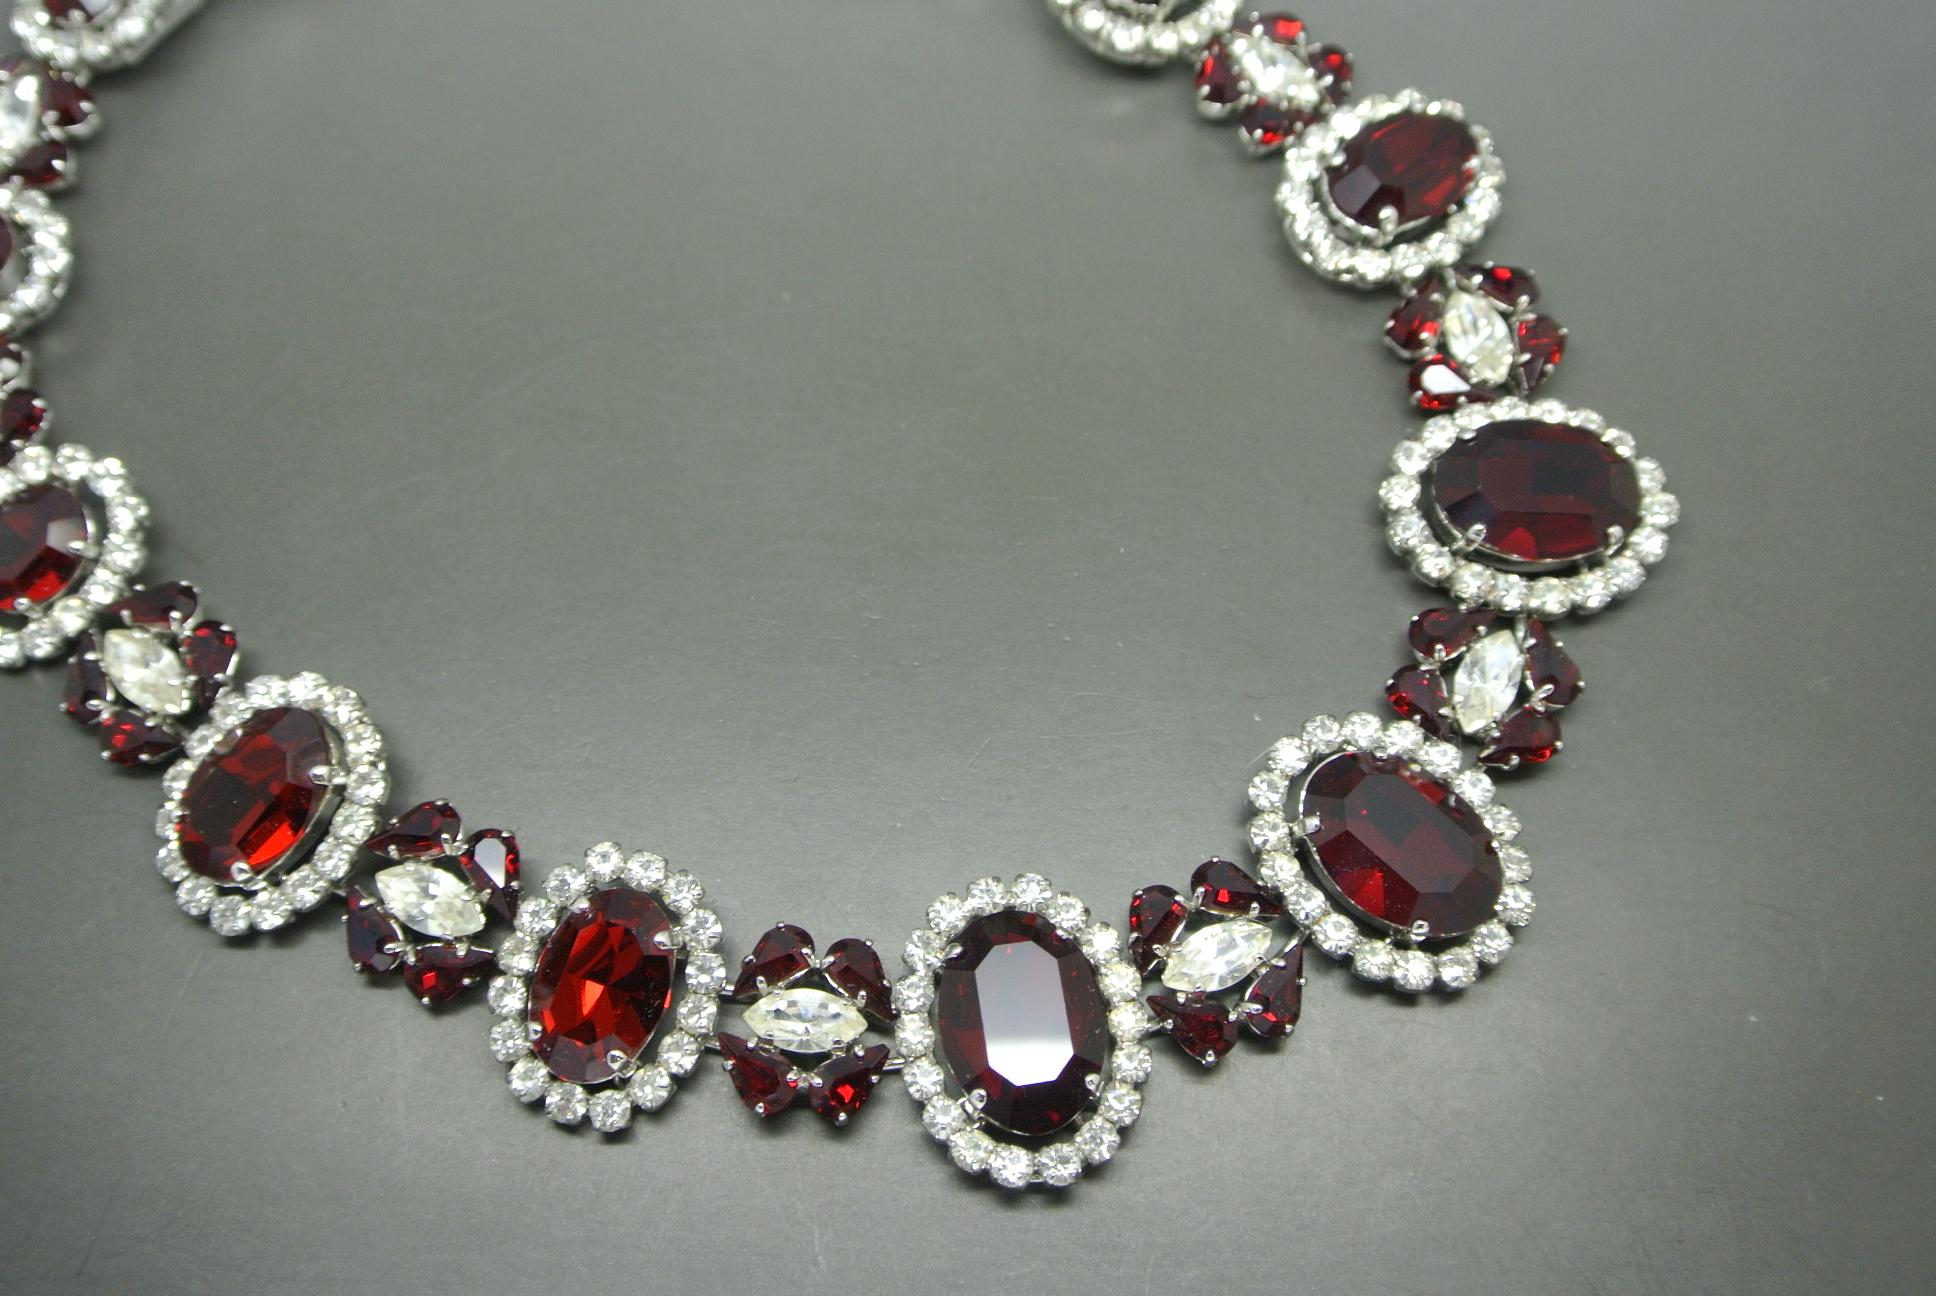 Christian Dior couture necklace
signed and dated 1963
Made by Henkel Grosse company